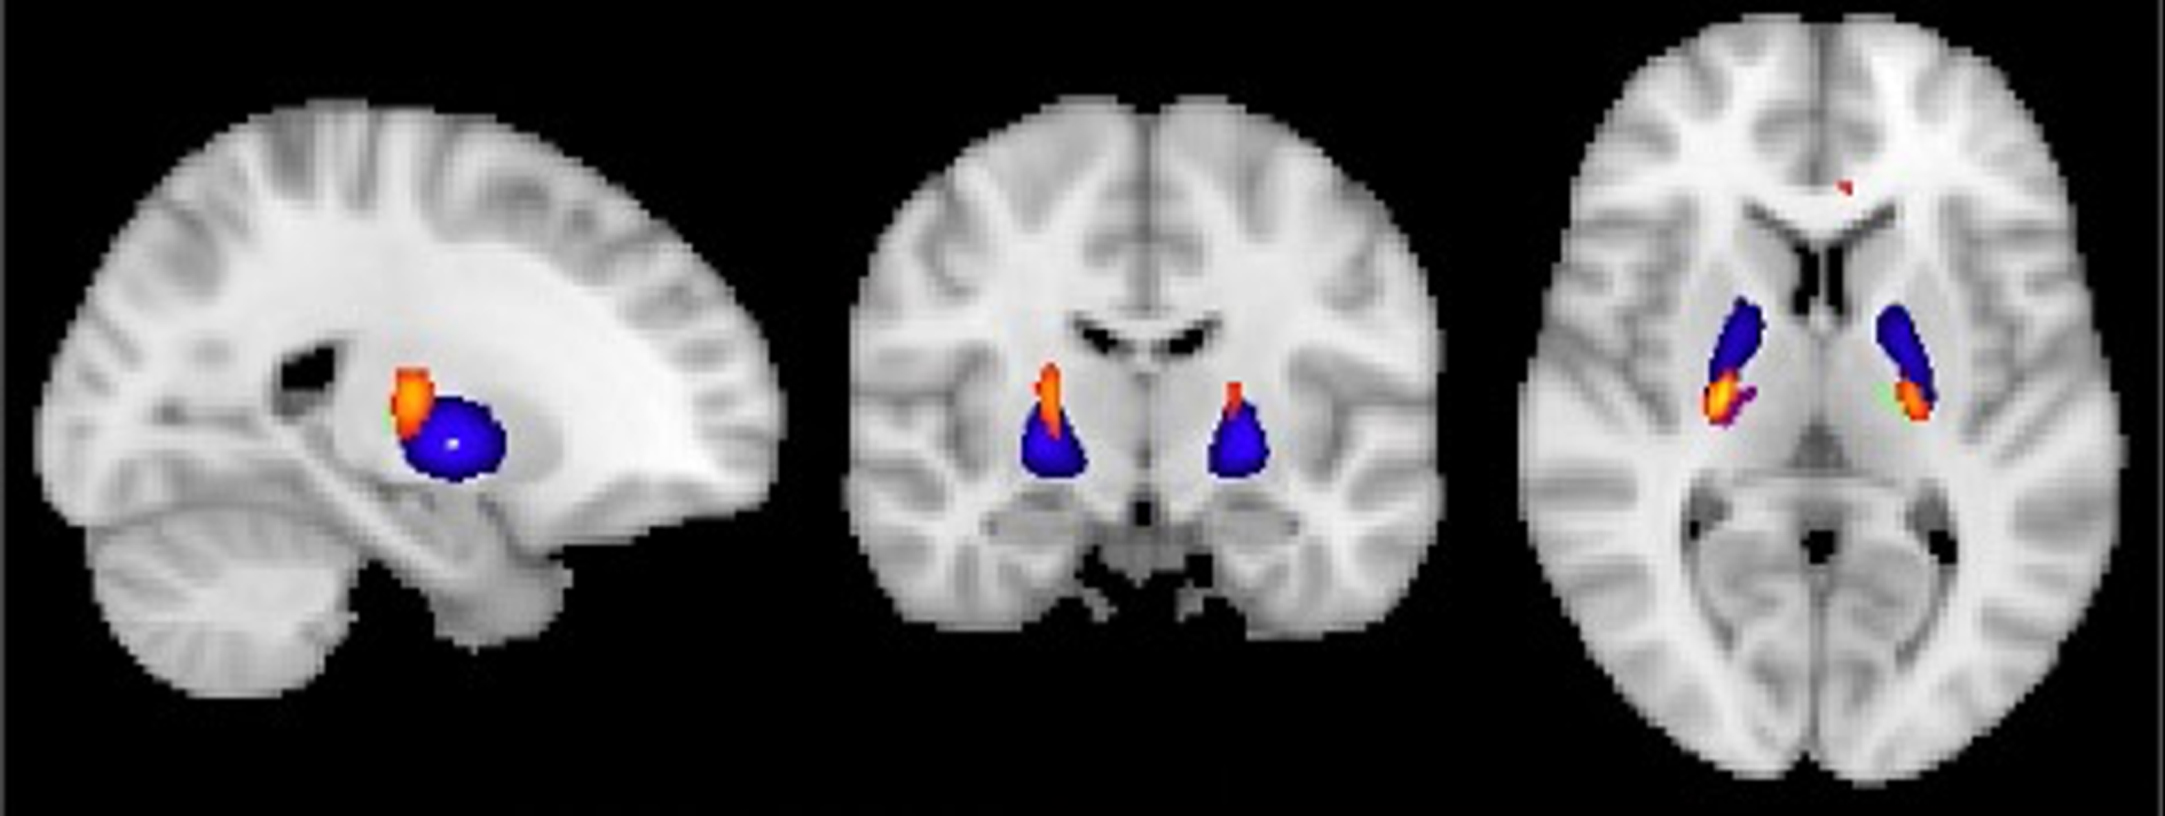 Visualization of GM volume reduction cluster (yellow/orange) in EMCI < CN located in the bilateral ventrolateral thalamus (green/purple) and globus pallidus (blue) according to the Talairach and Harvard-Oxford structural atlas.